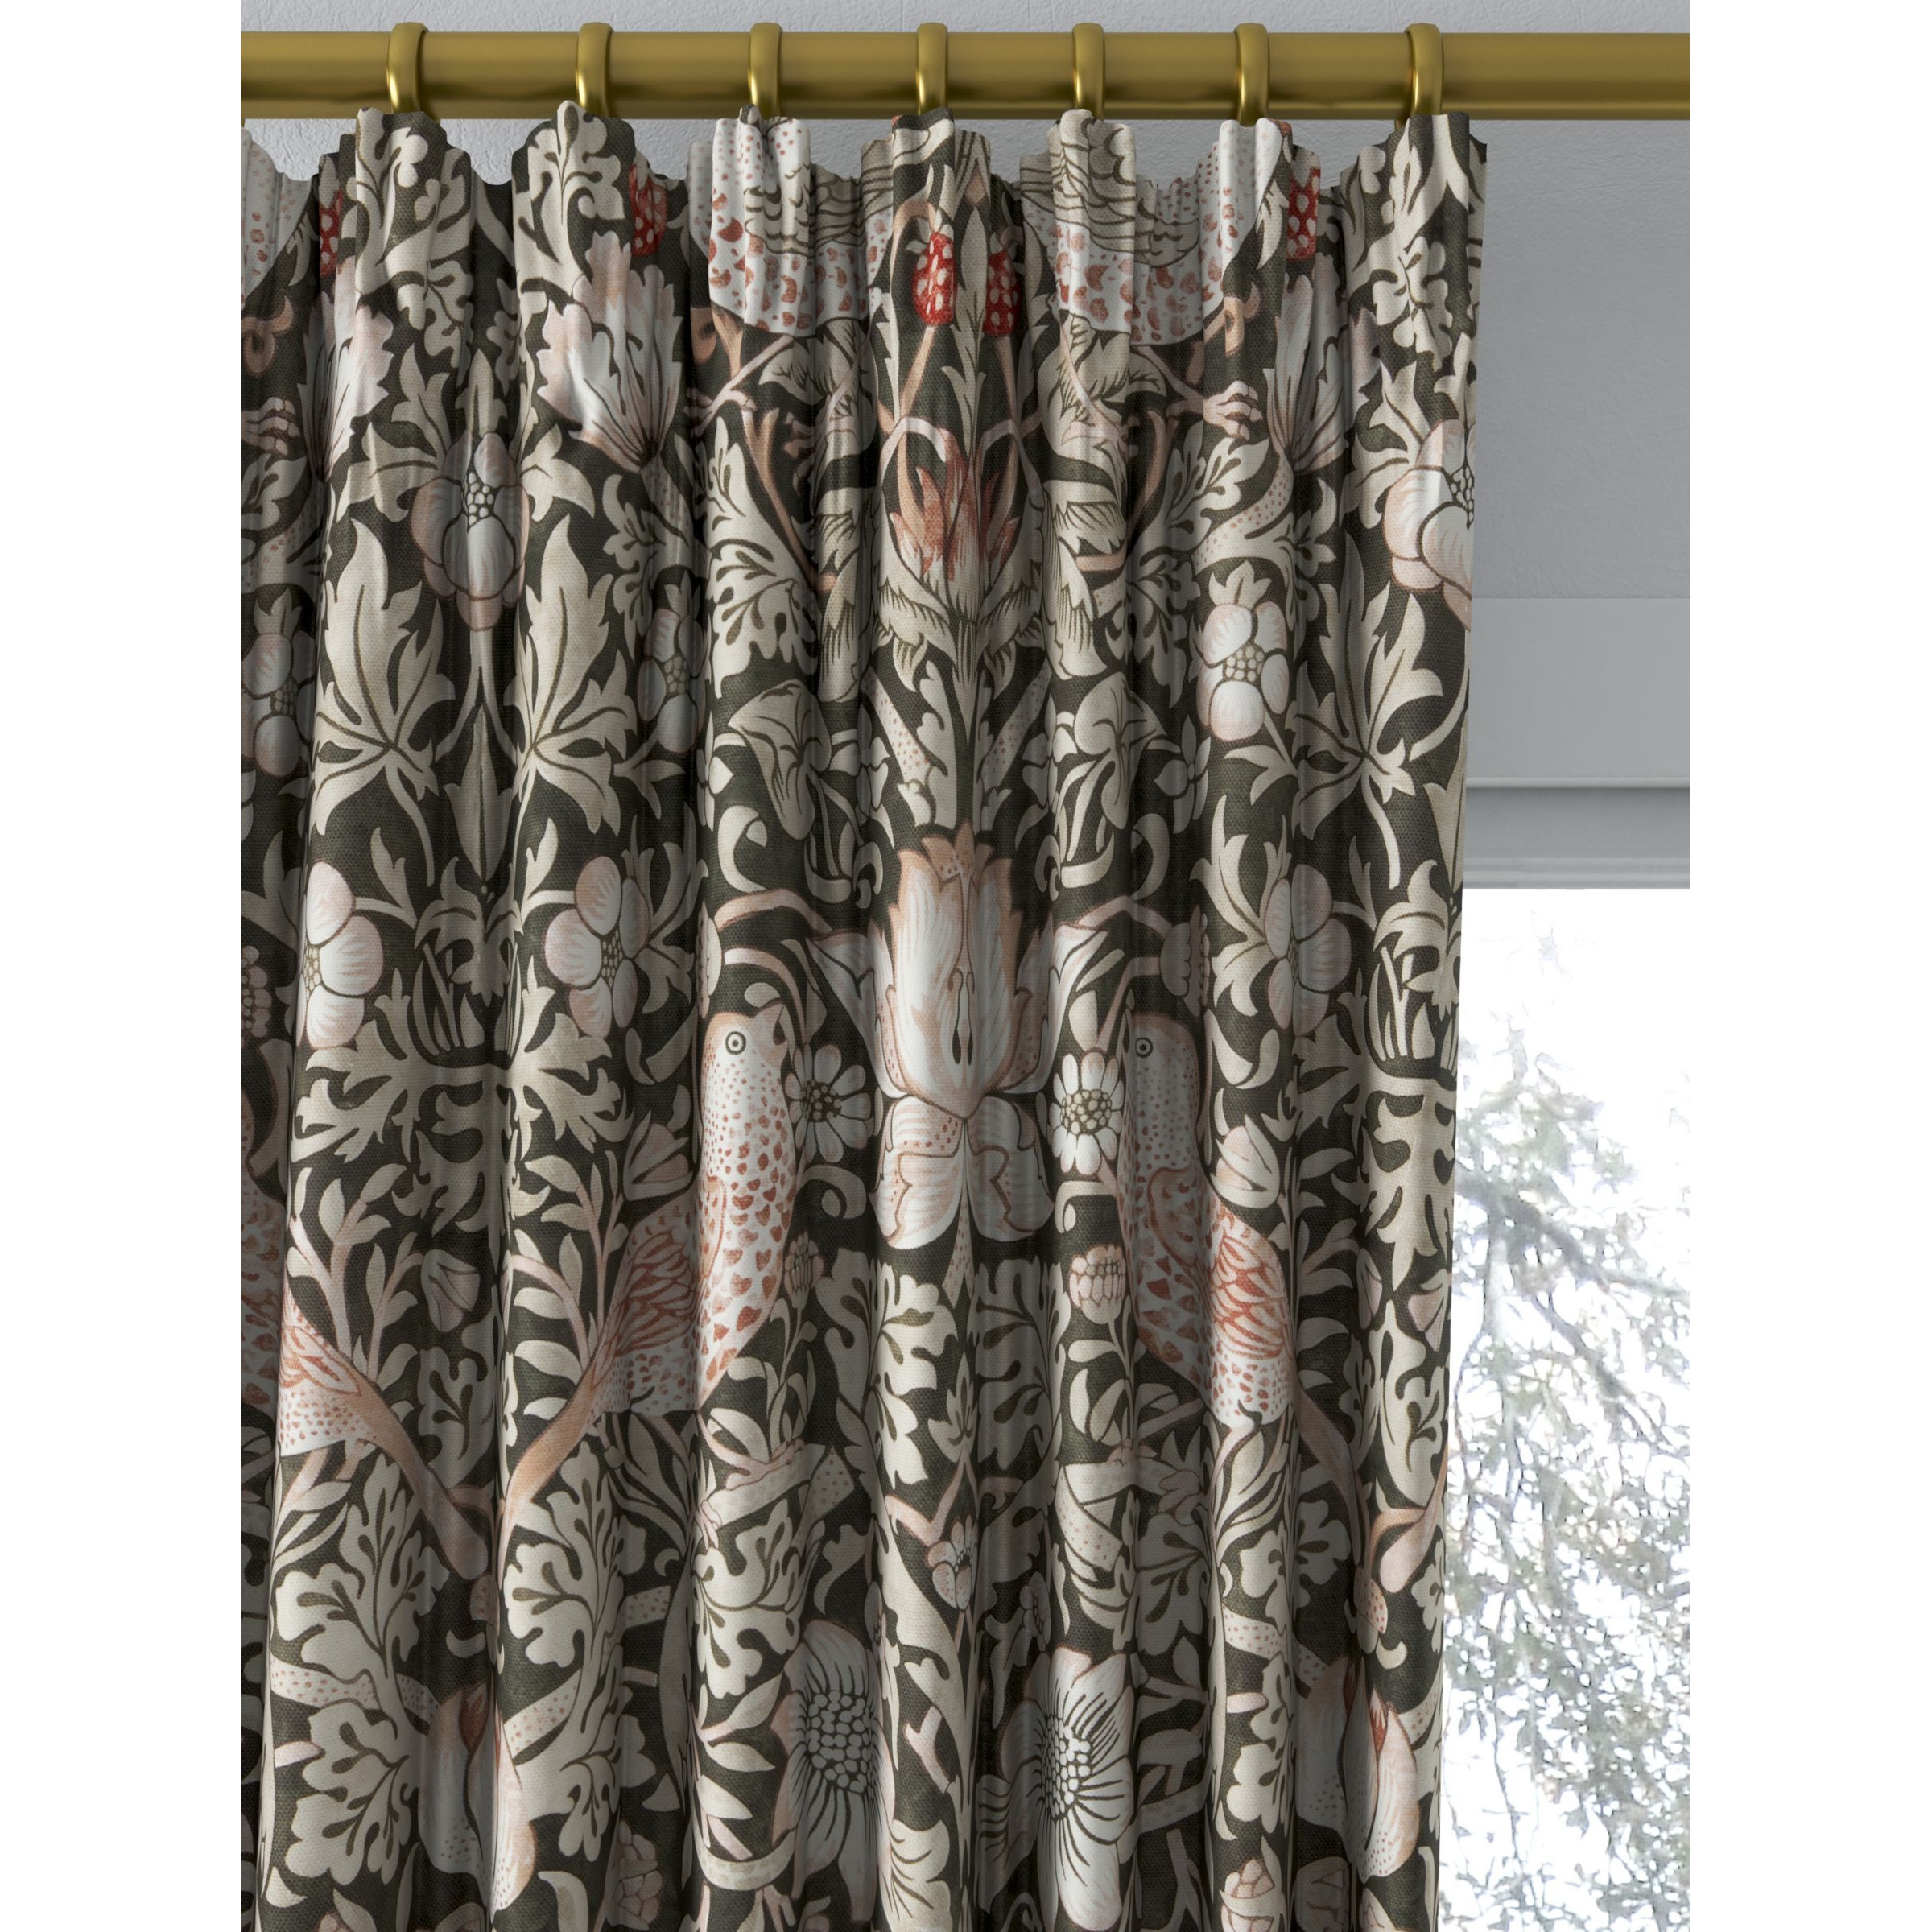 Morris & Co. Strawberry Thief Pair Lined Pencil Pleat Curtains, Charcoal/Pink - image 1